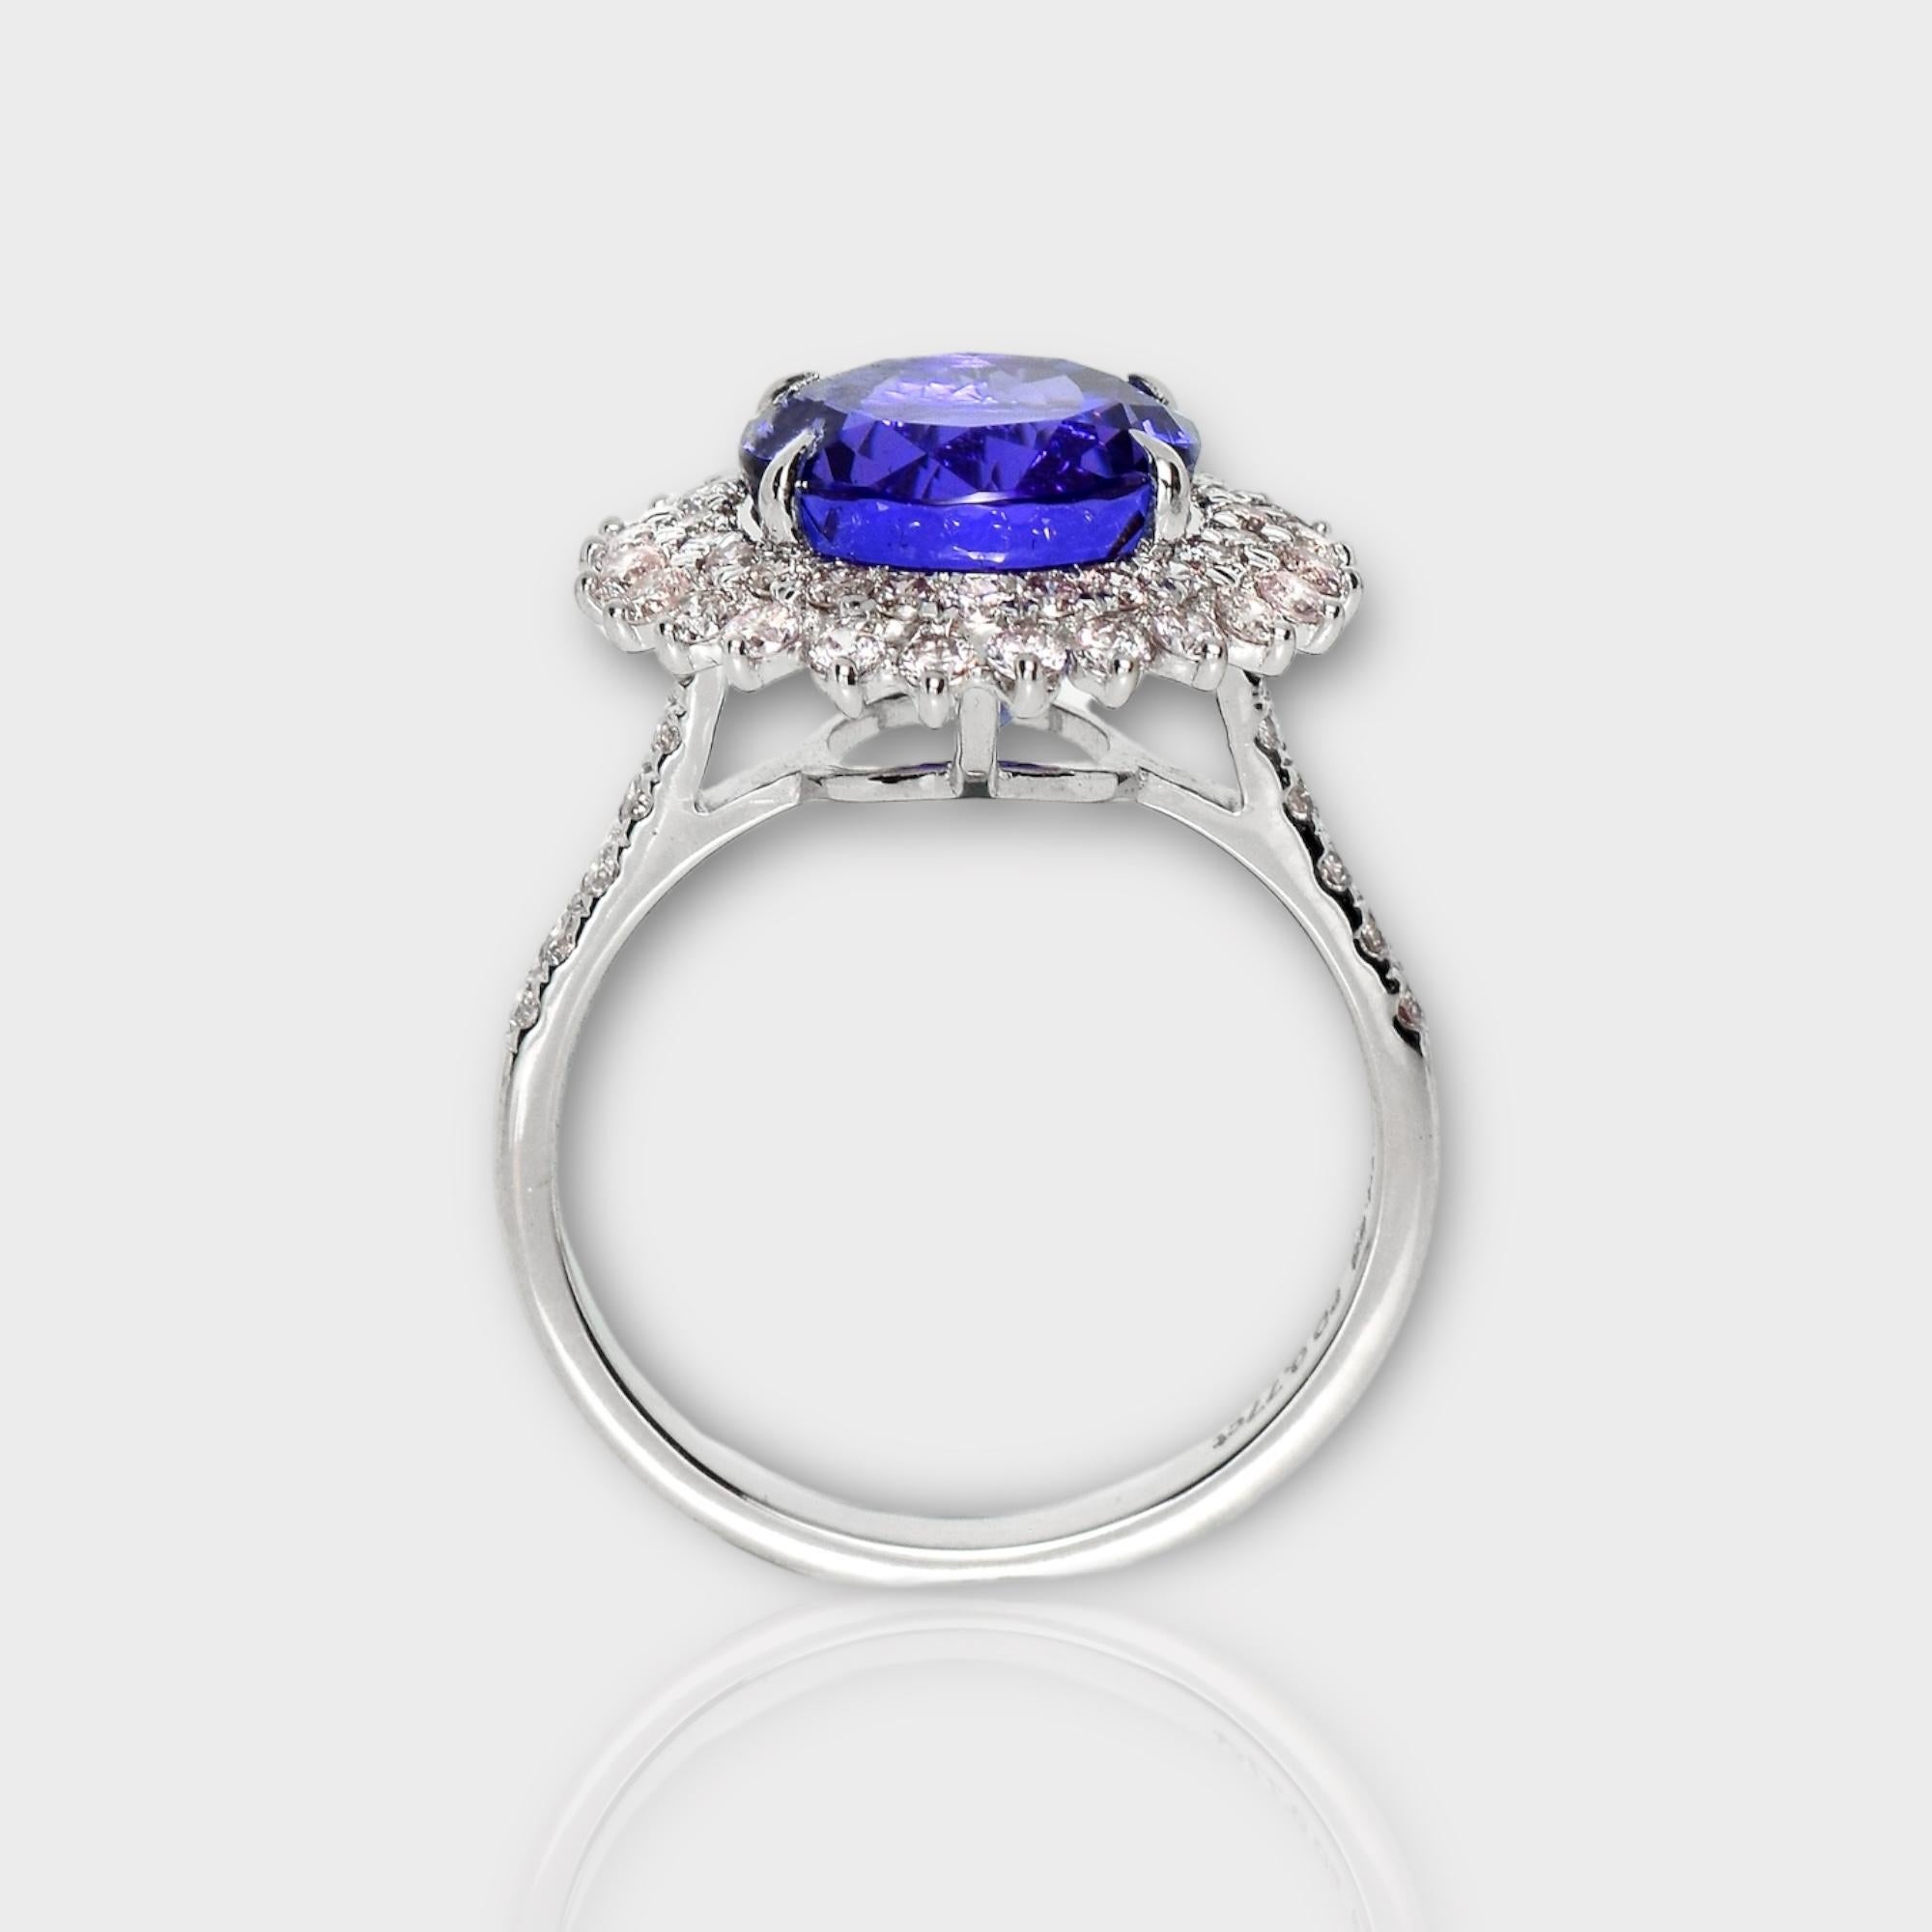 IGI 14K 4.66 ct Tanzanite&Pink Diamond Antique Art Deco Engagement Ring In New Condition For Sale In Kaohsiung City, TW